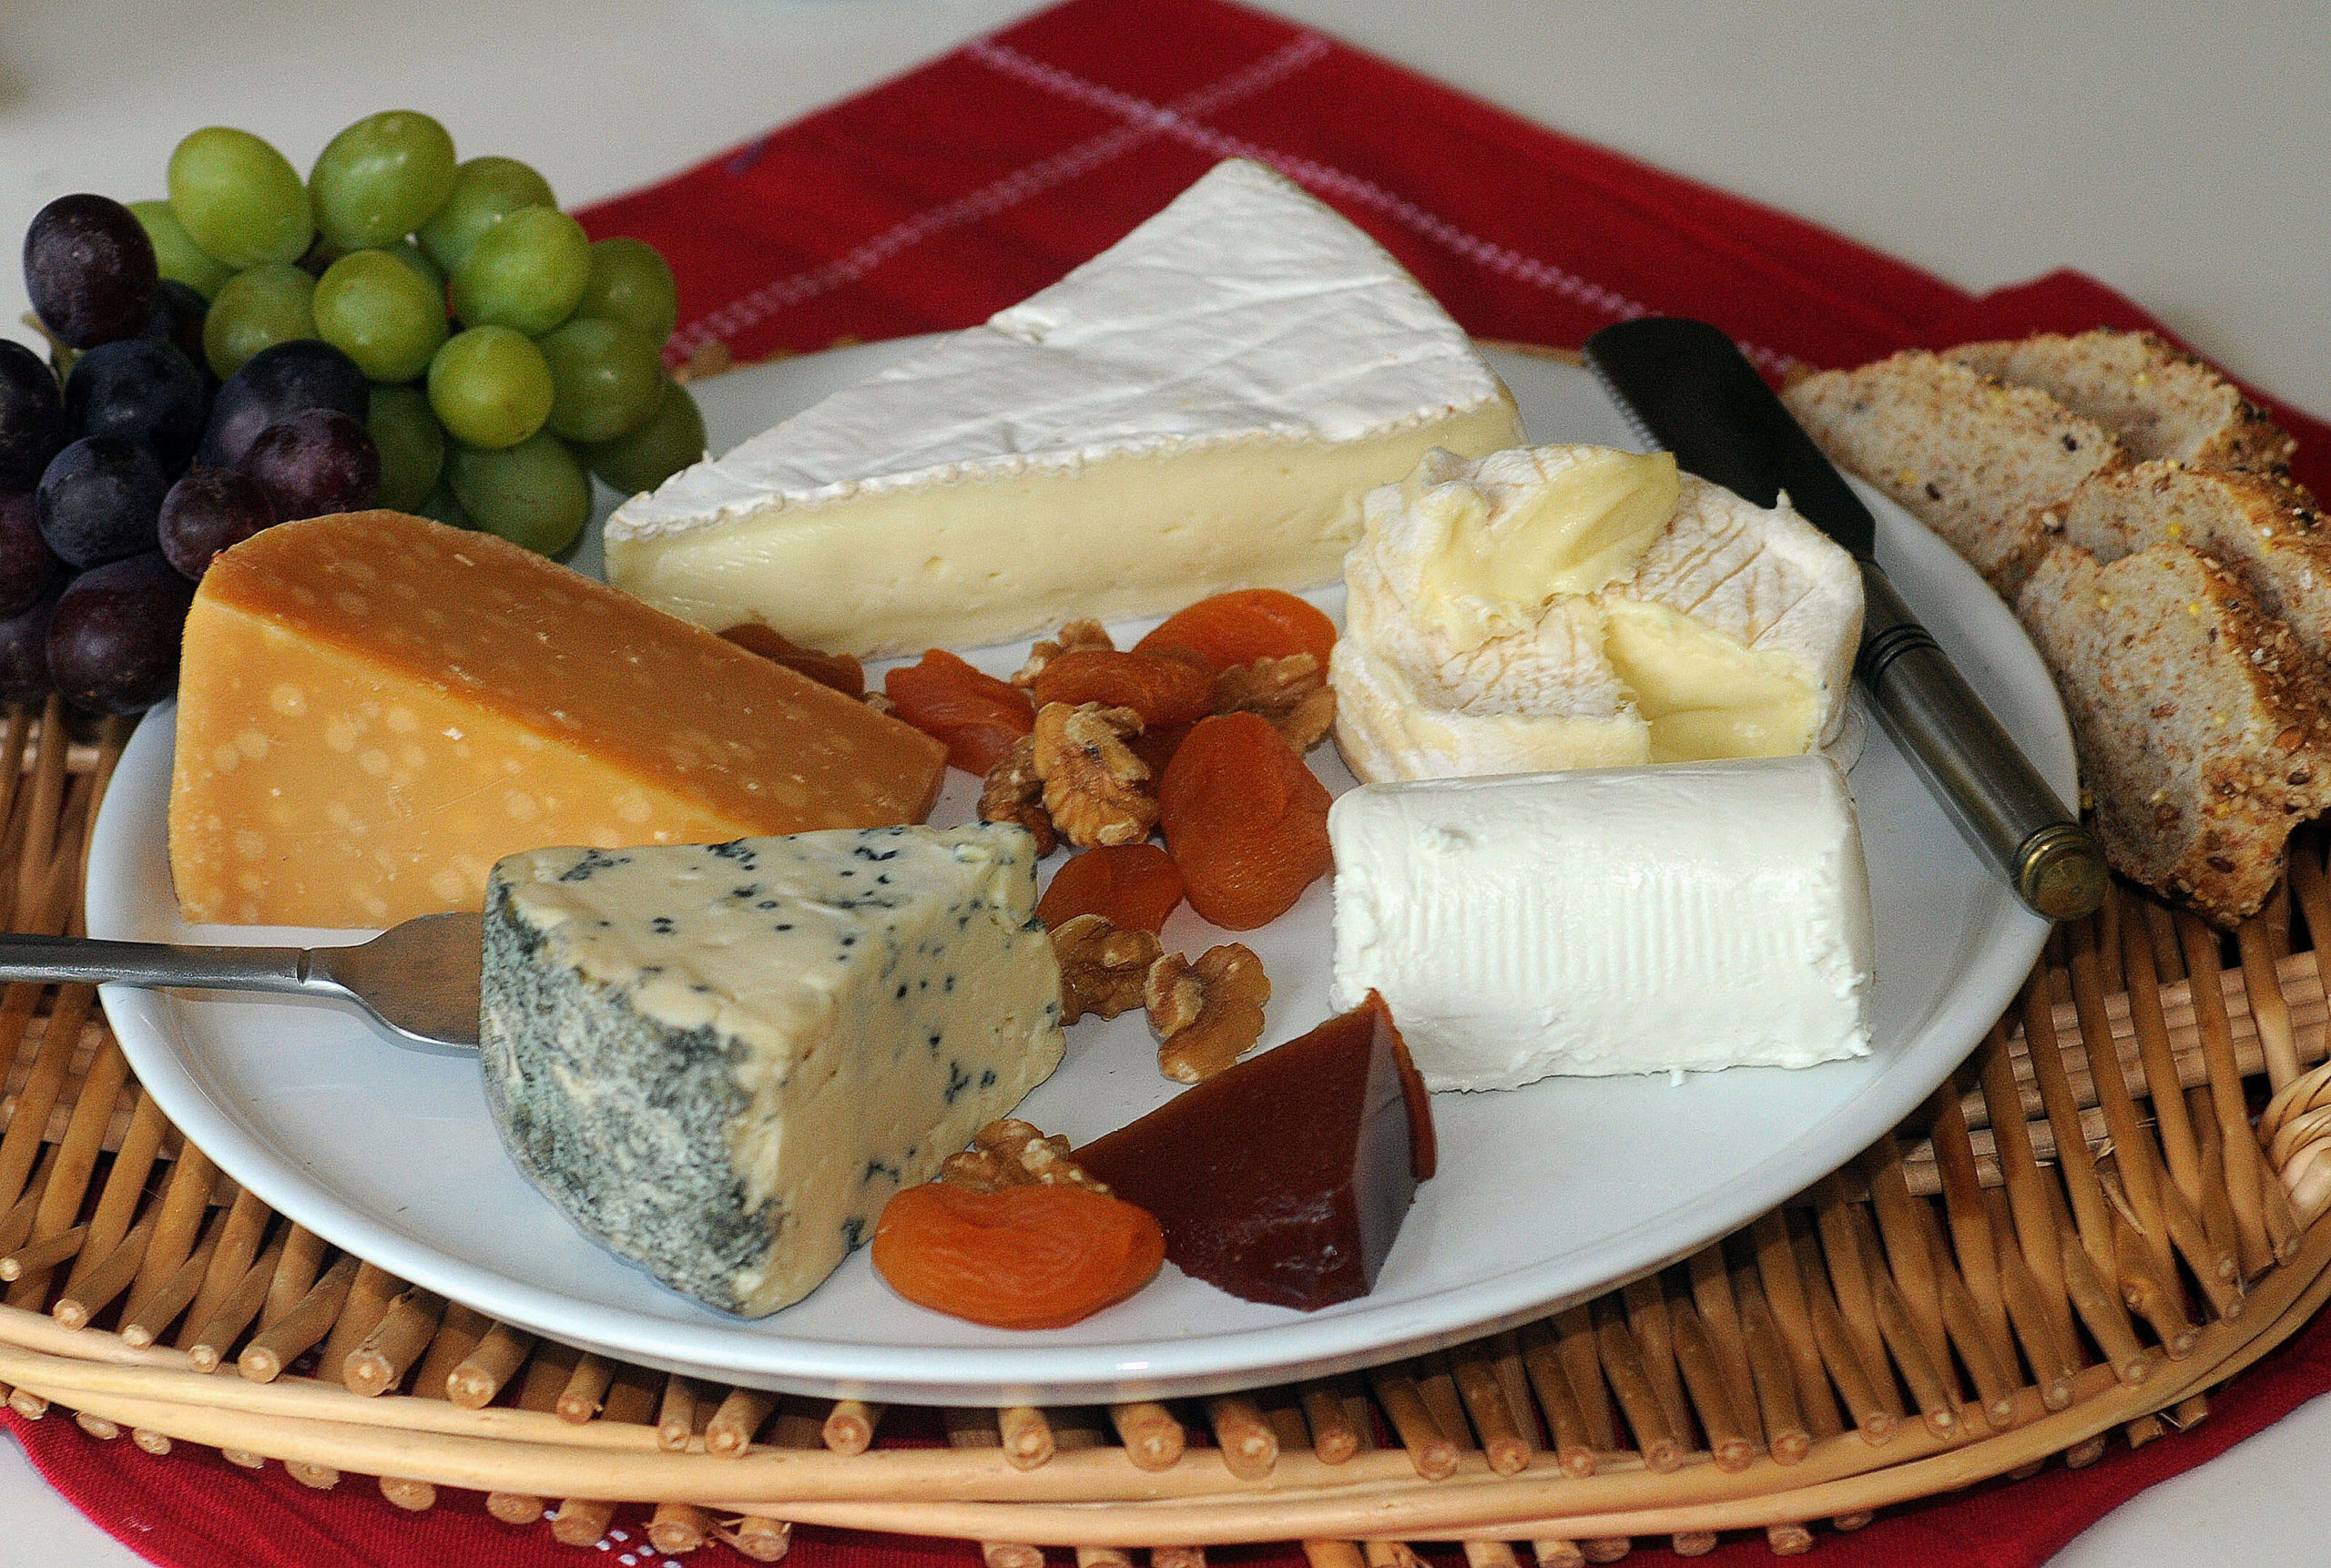 A cheese platter makes an easy, elegant ending to a special meal. (Peter Andrew Bosch/Miami Herald/MCT via Getty Images)